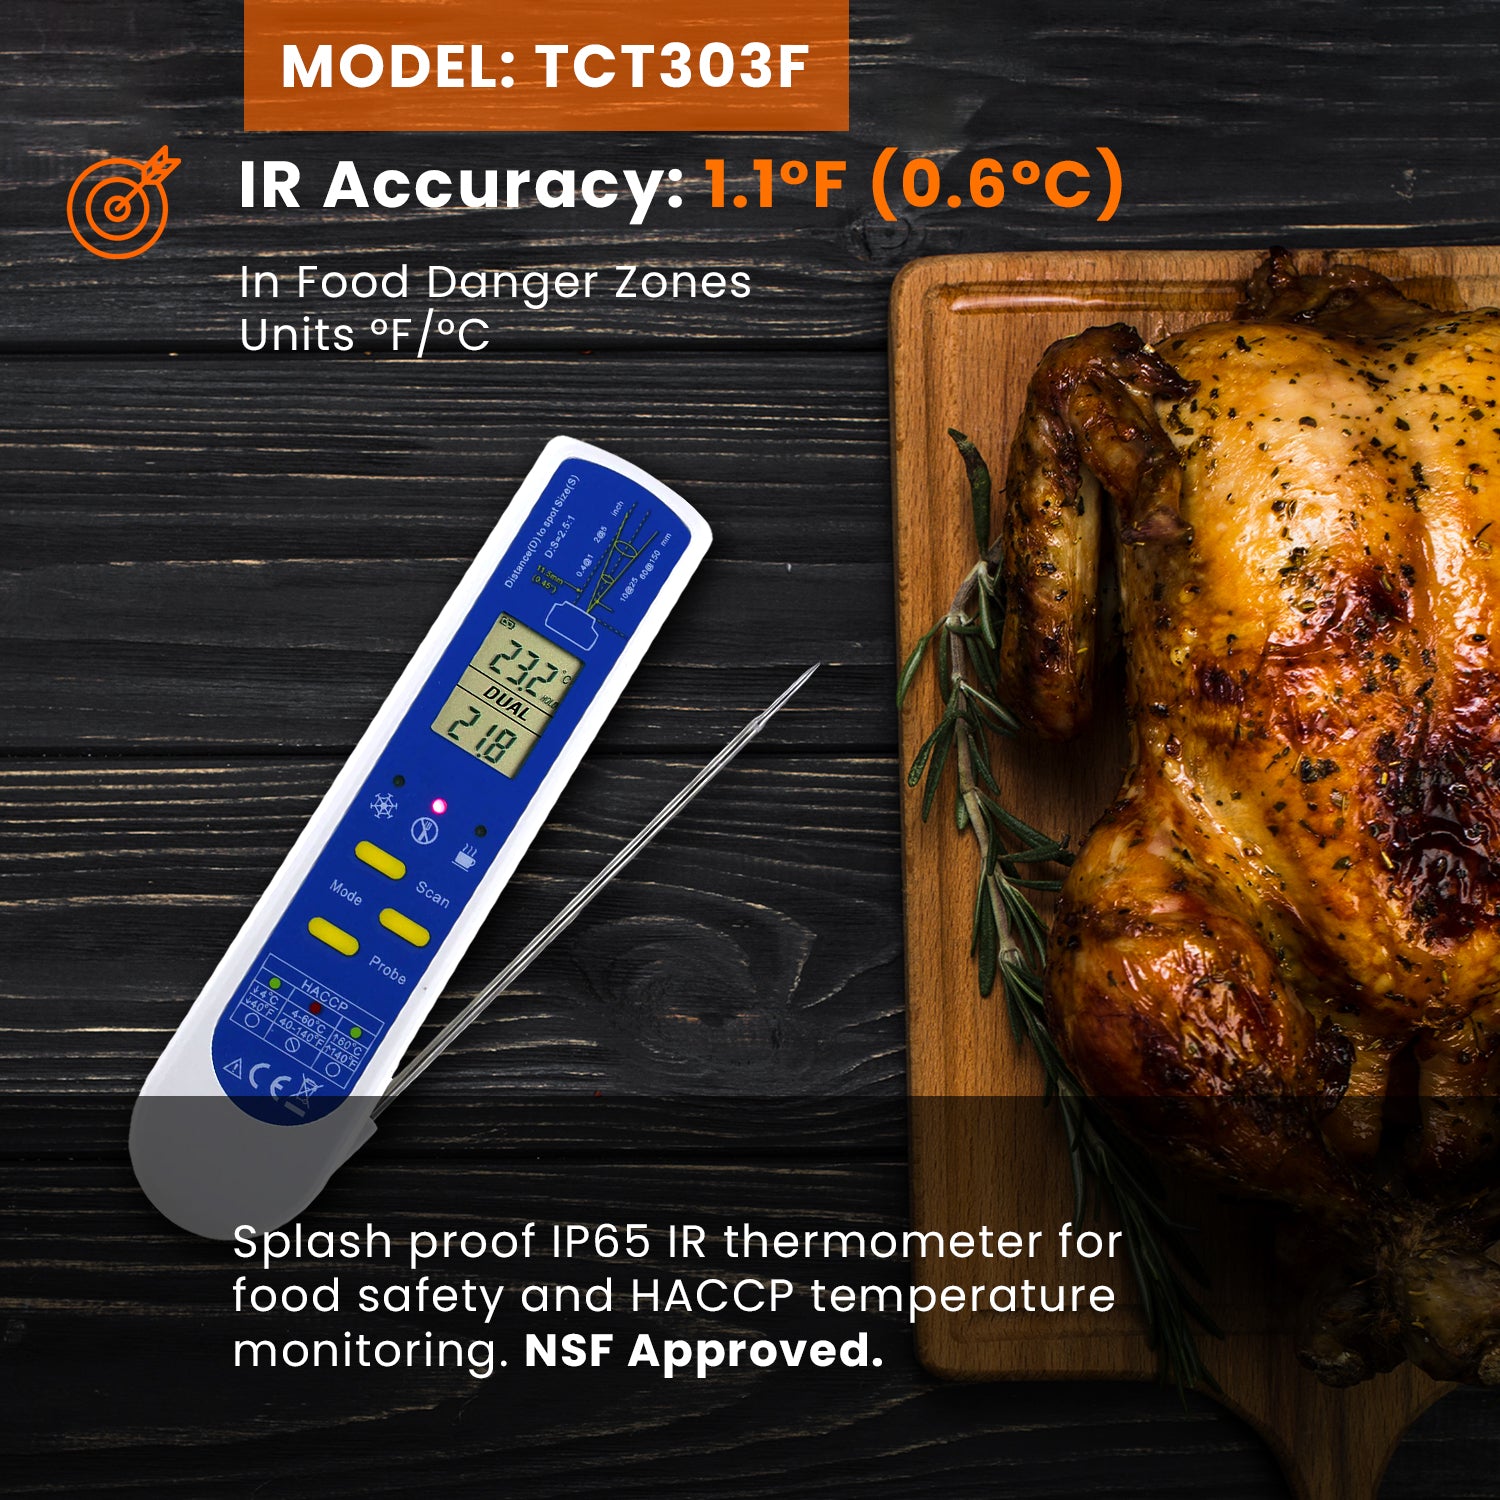 Food Safety Infrared & Probe Cooking Thermometer (IRT303) 2.5:1